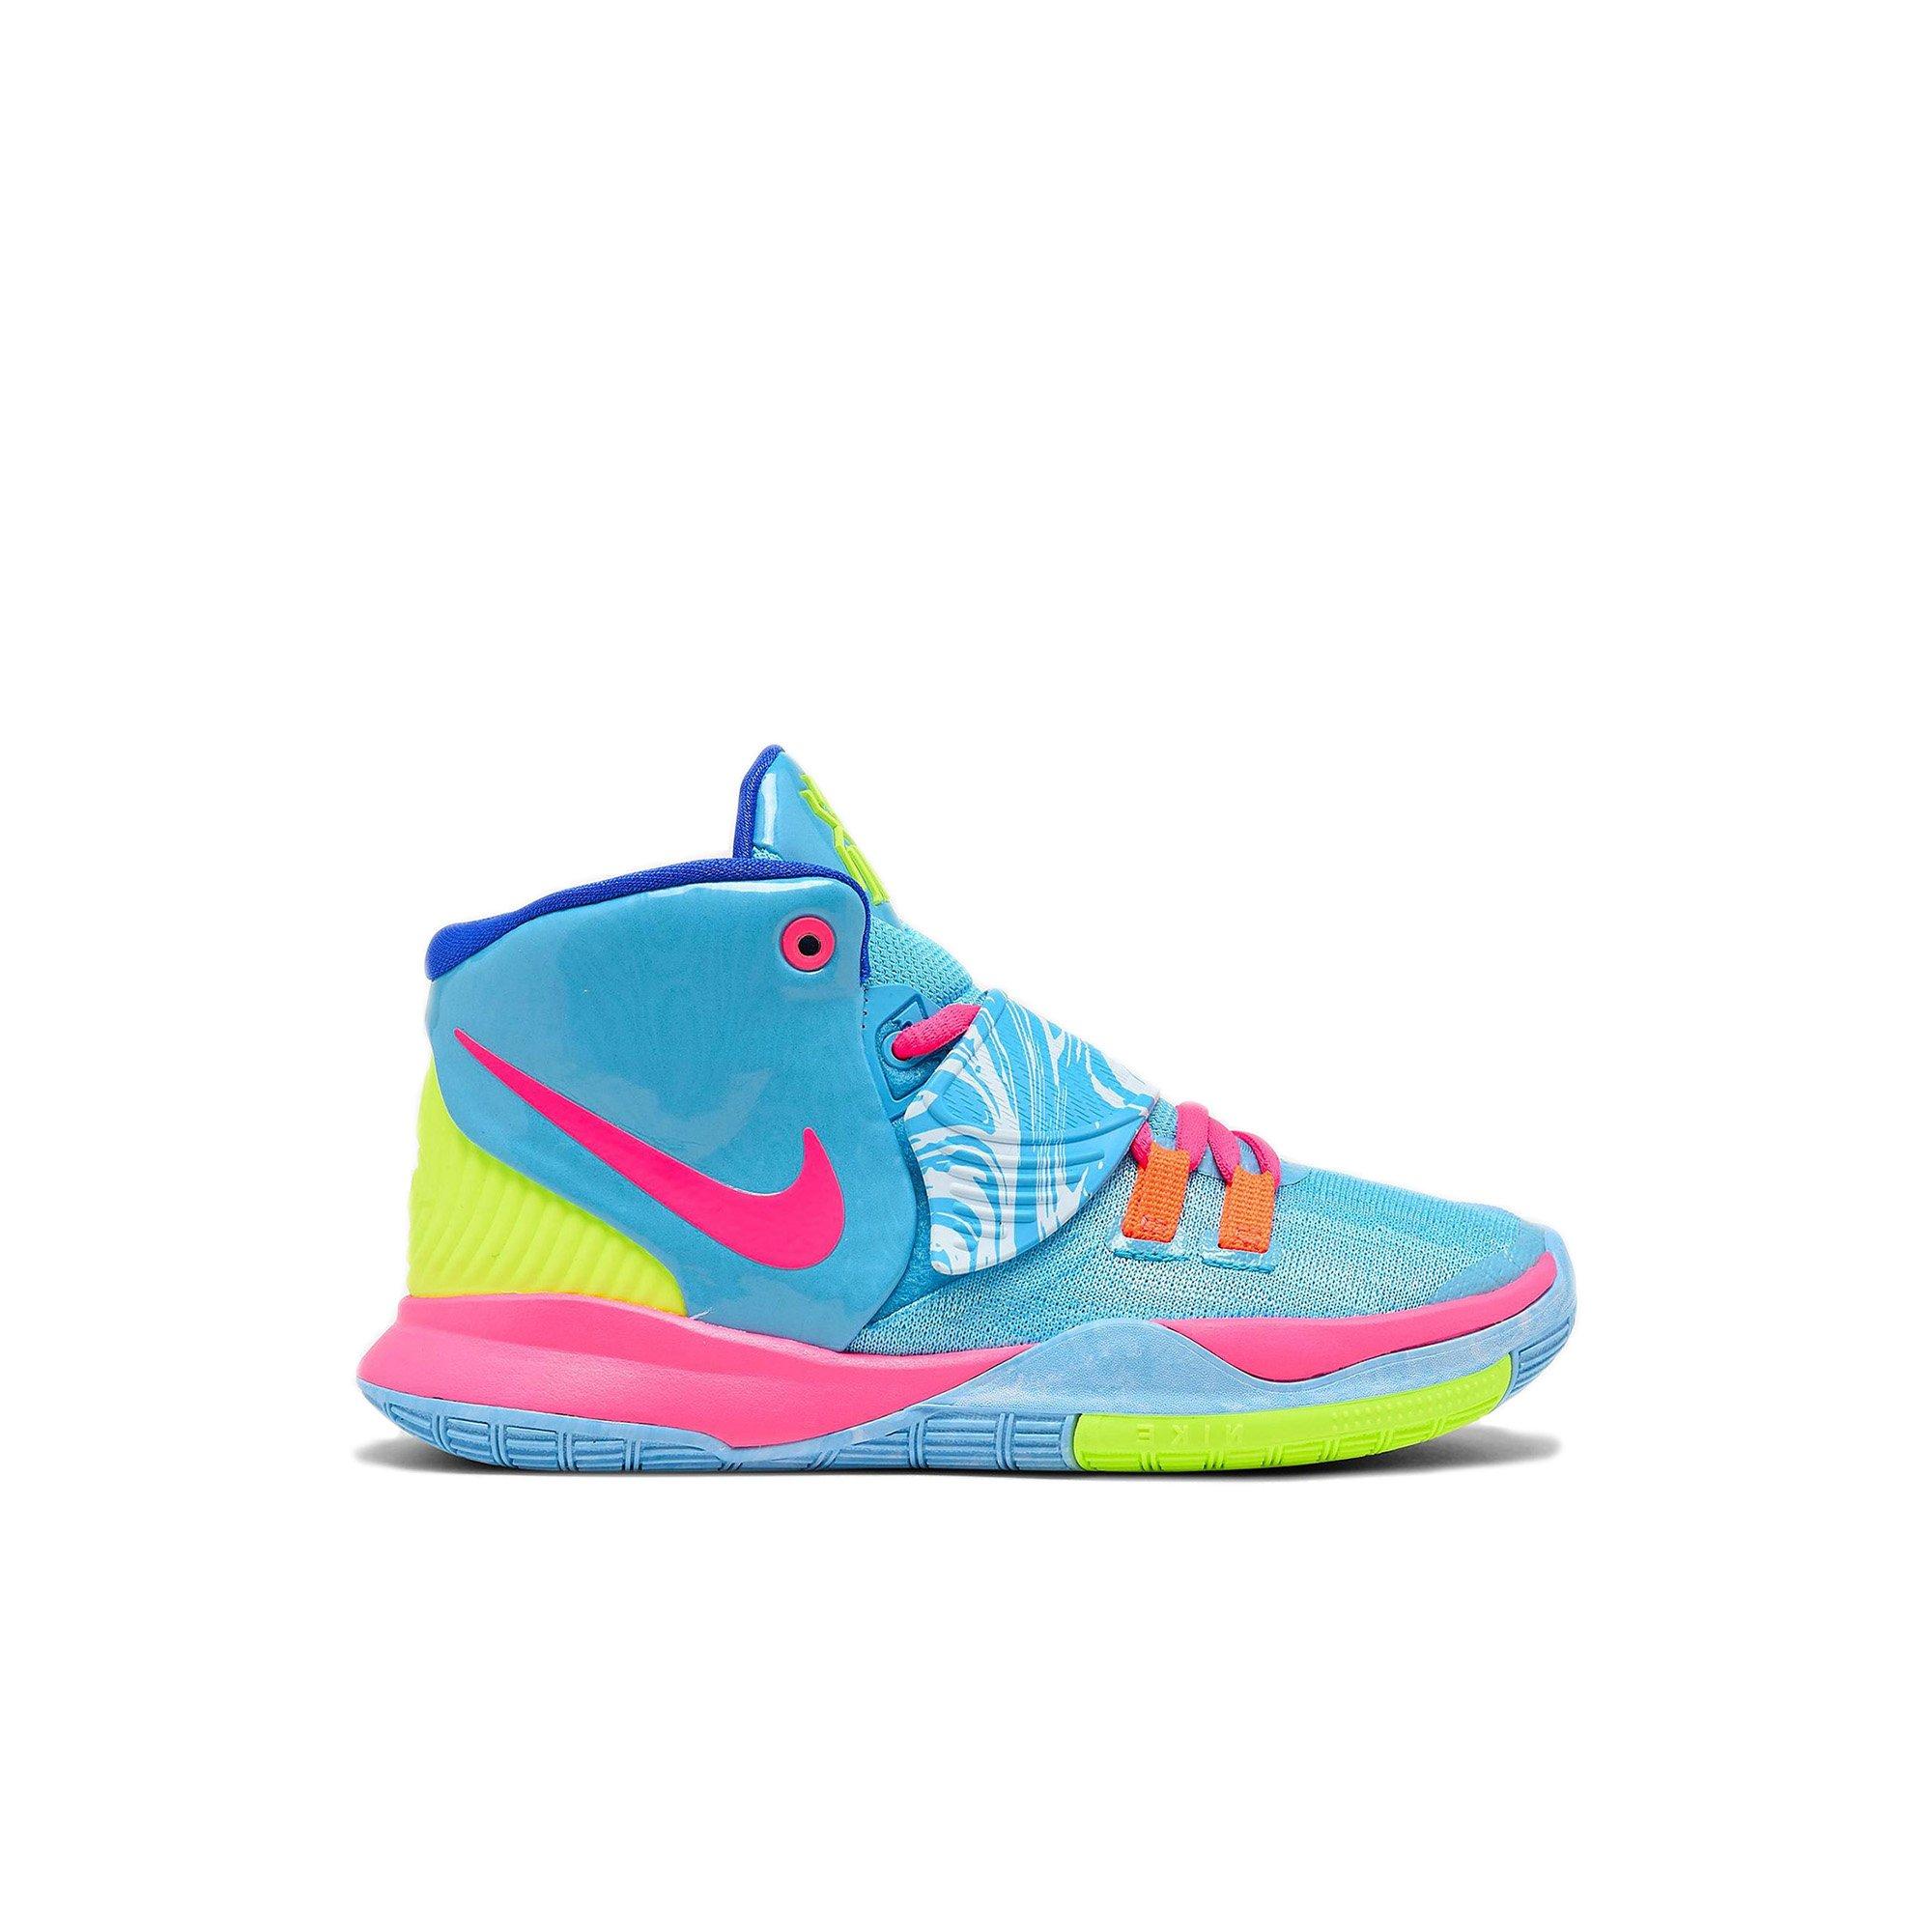 kyrie irving shoes colorful